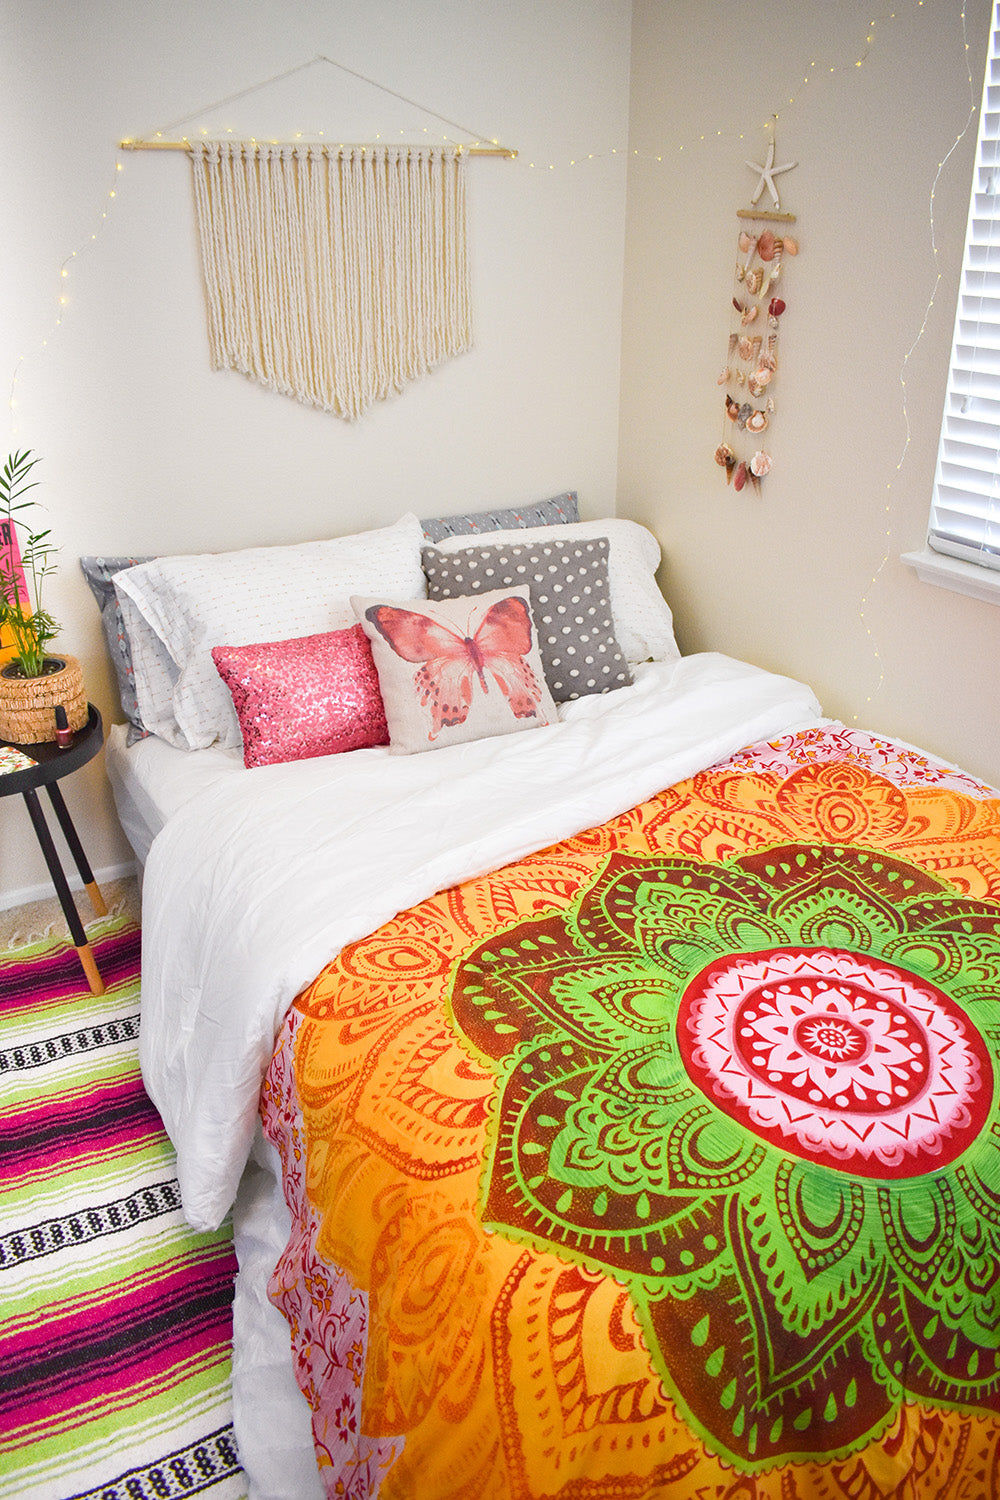 Those dark, gloomy, and grey days got you down this winter? Add a little sunshine to your day with the Blossom Mandala Roundie. This colorful round tapestry radiates warmth and cozy vibes with its vivid summer inspired colors. A quick and easy way to brighten up any room.